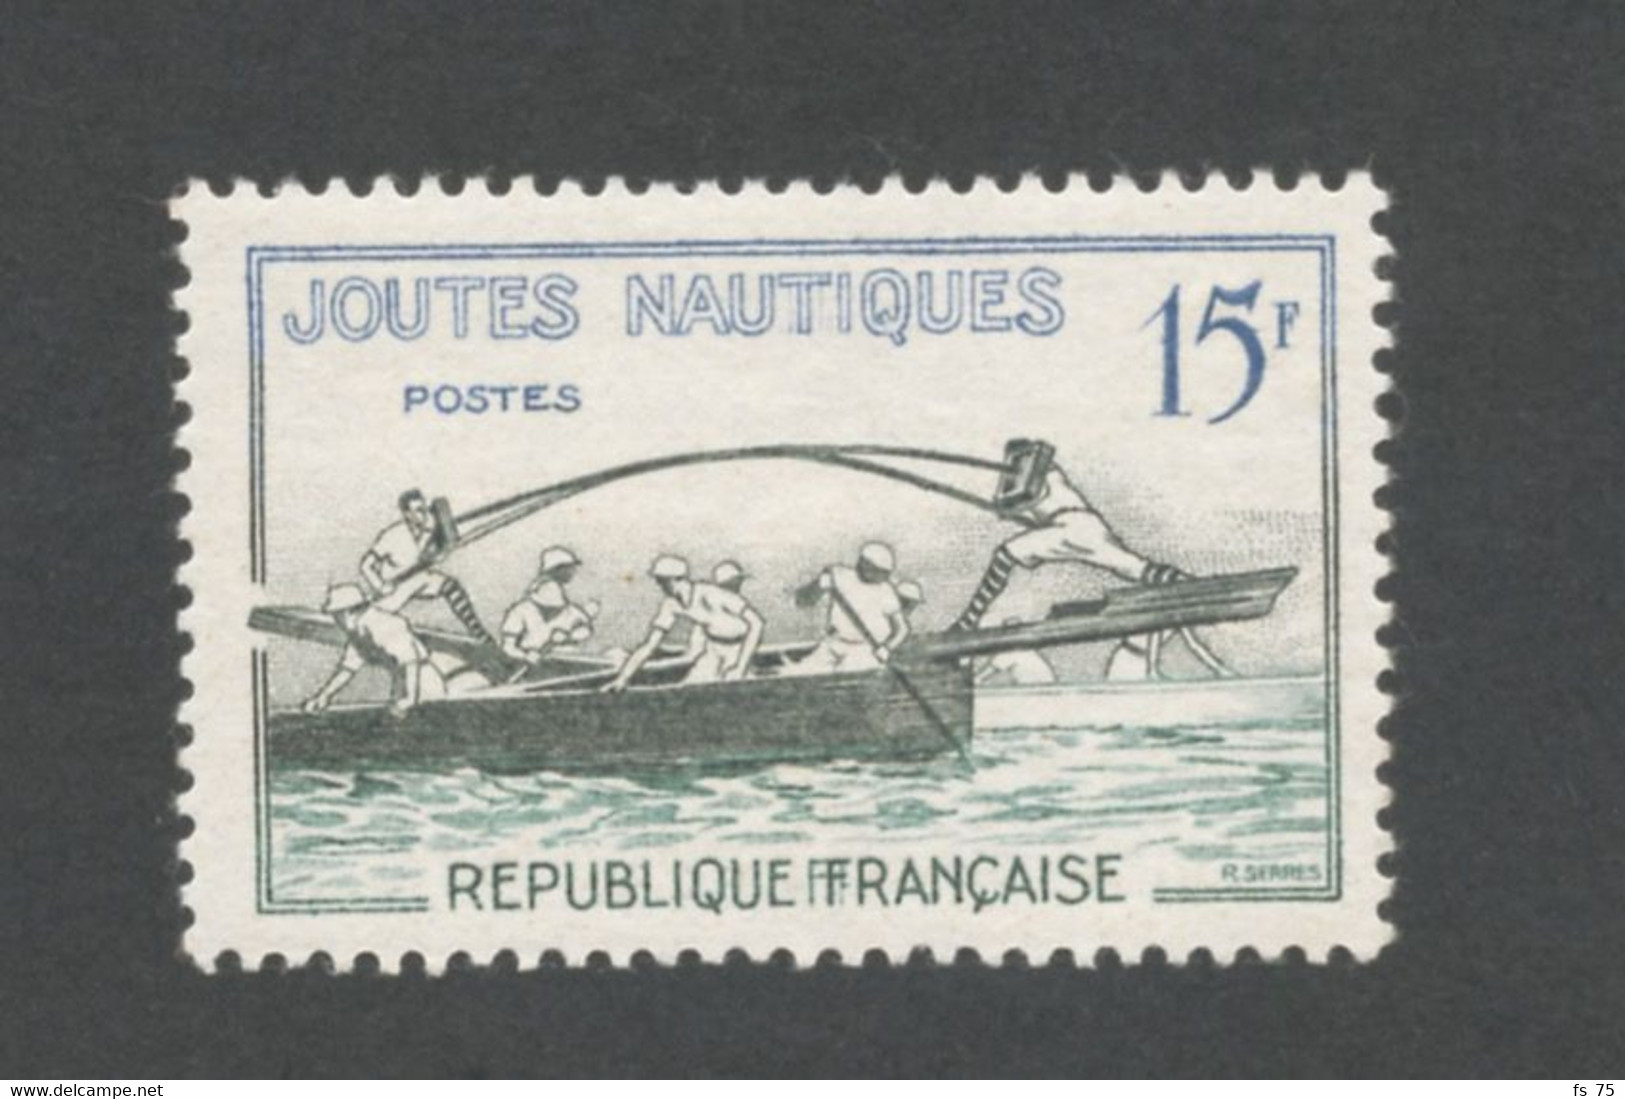 FRANCE - N°1162  15F JOUTES NAUTIQUES - DOUBLE F A FRANCAISE - NEUF SANS CHARNIERE - Nuovi